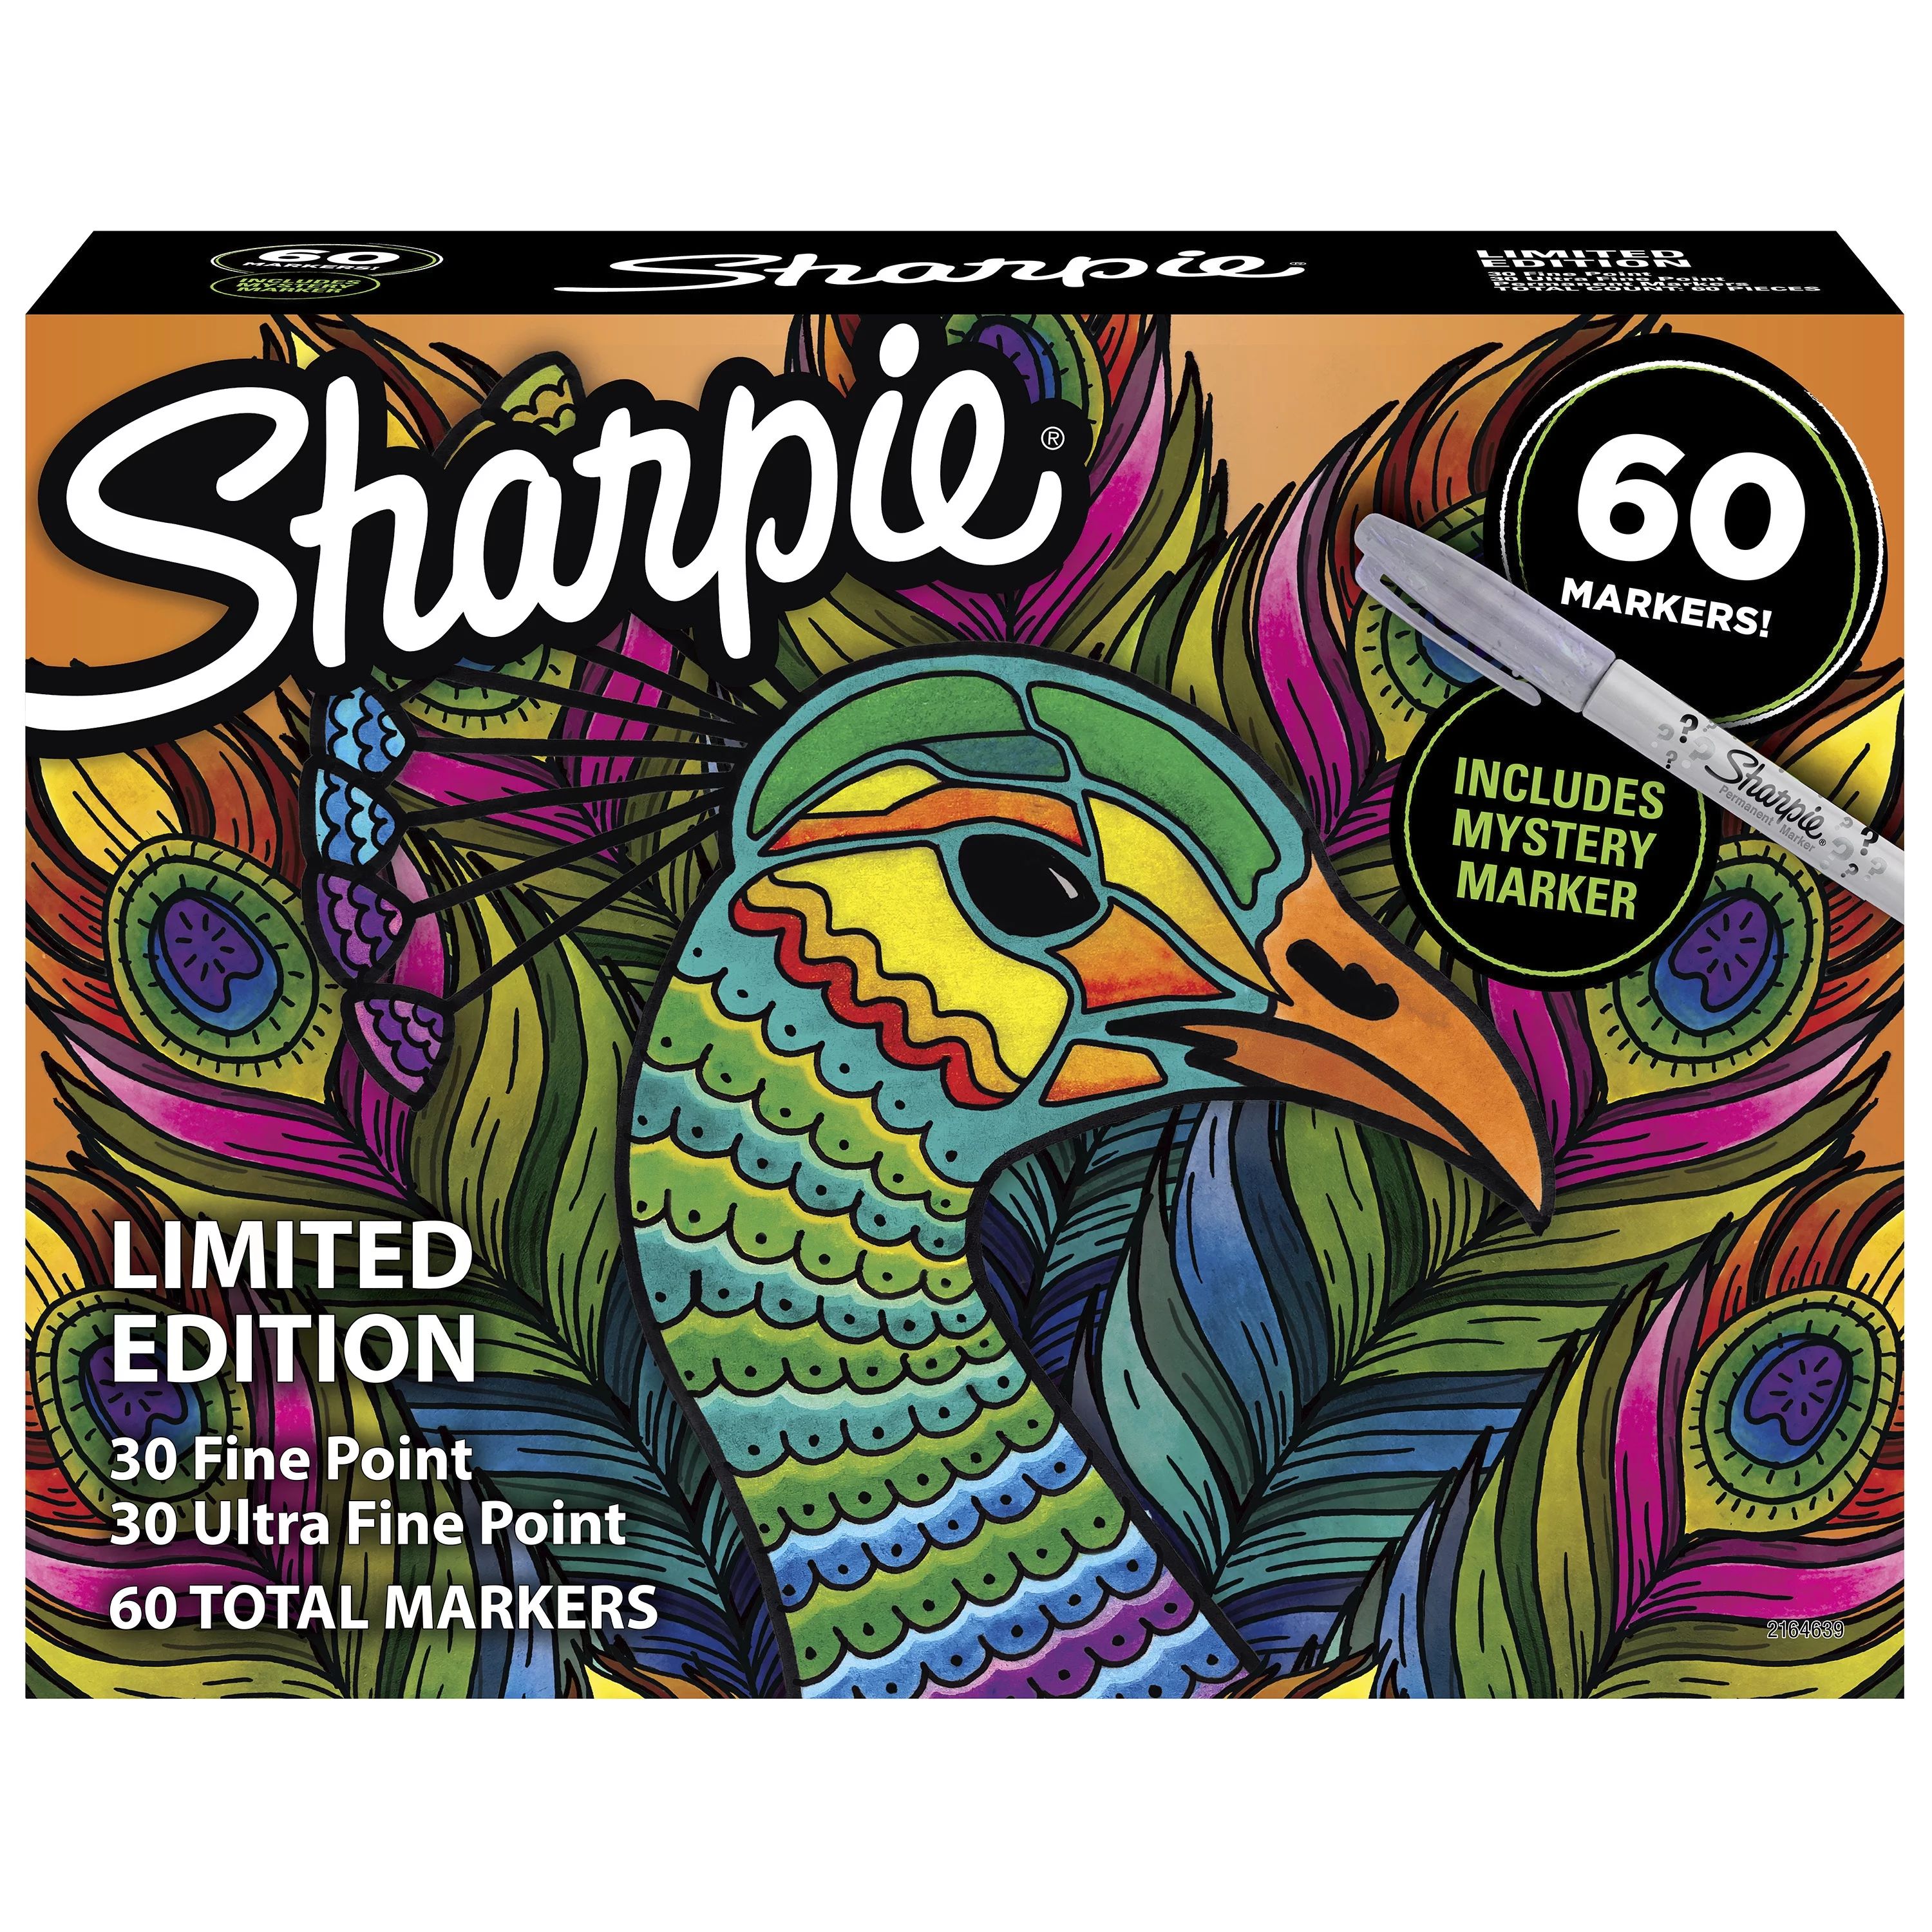 Sharpie Permanent Markers, Limited Edition, Assorted Colors Plus 1 Mystery Marker, 60 Count, Holi... | Walmart (US)